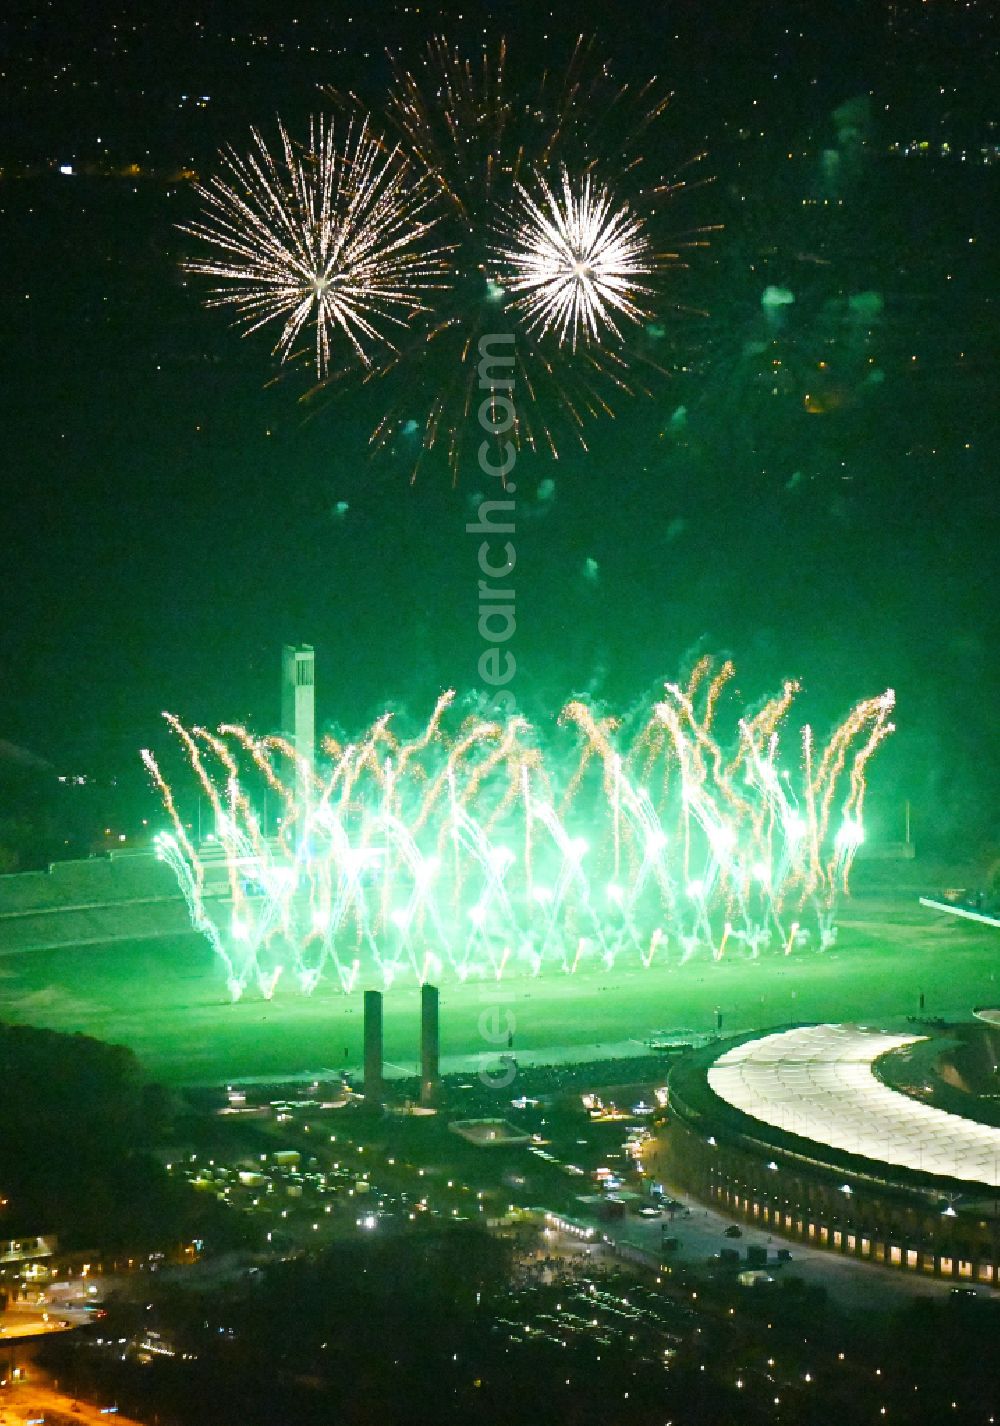 Aerial photograph at night Berlin - Night lighting Fireworks figures in the night sky above the event grounds of Pyronale Fireworks Competition at the Olympic Stadium in the district Charlottenburg in Berlin, Germany